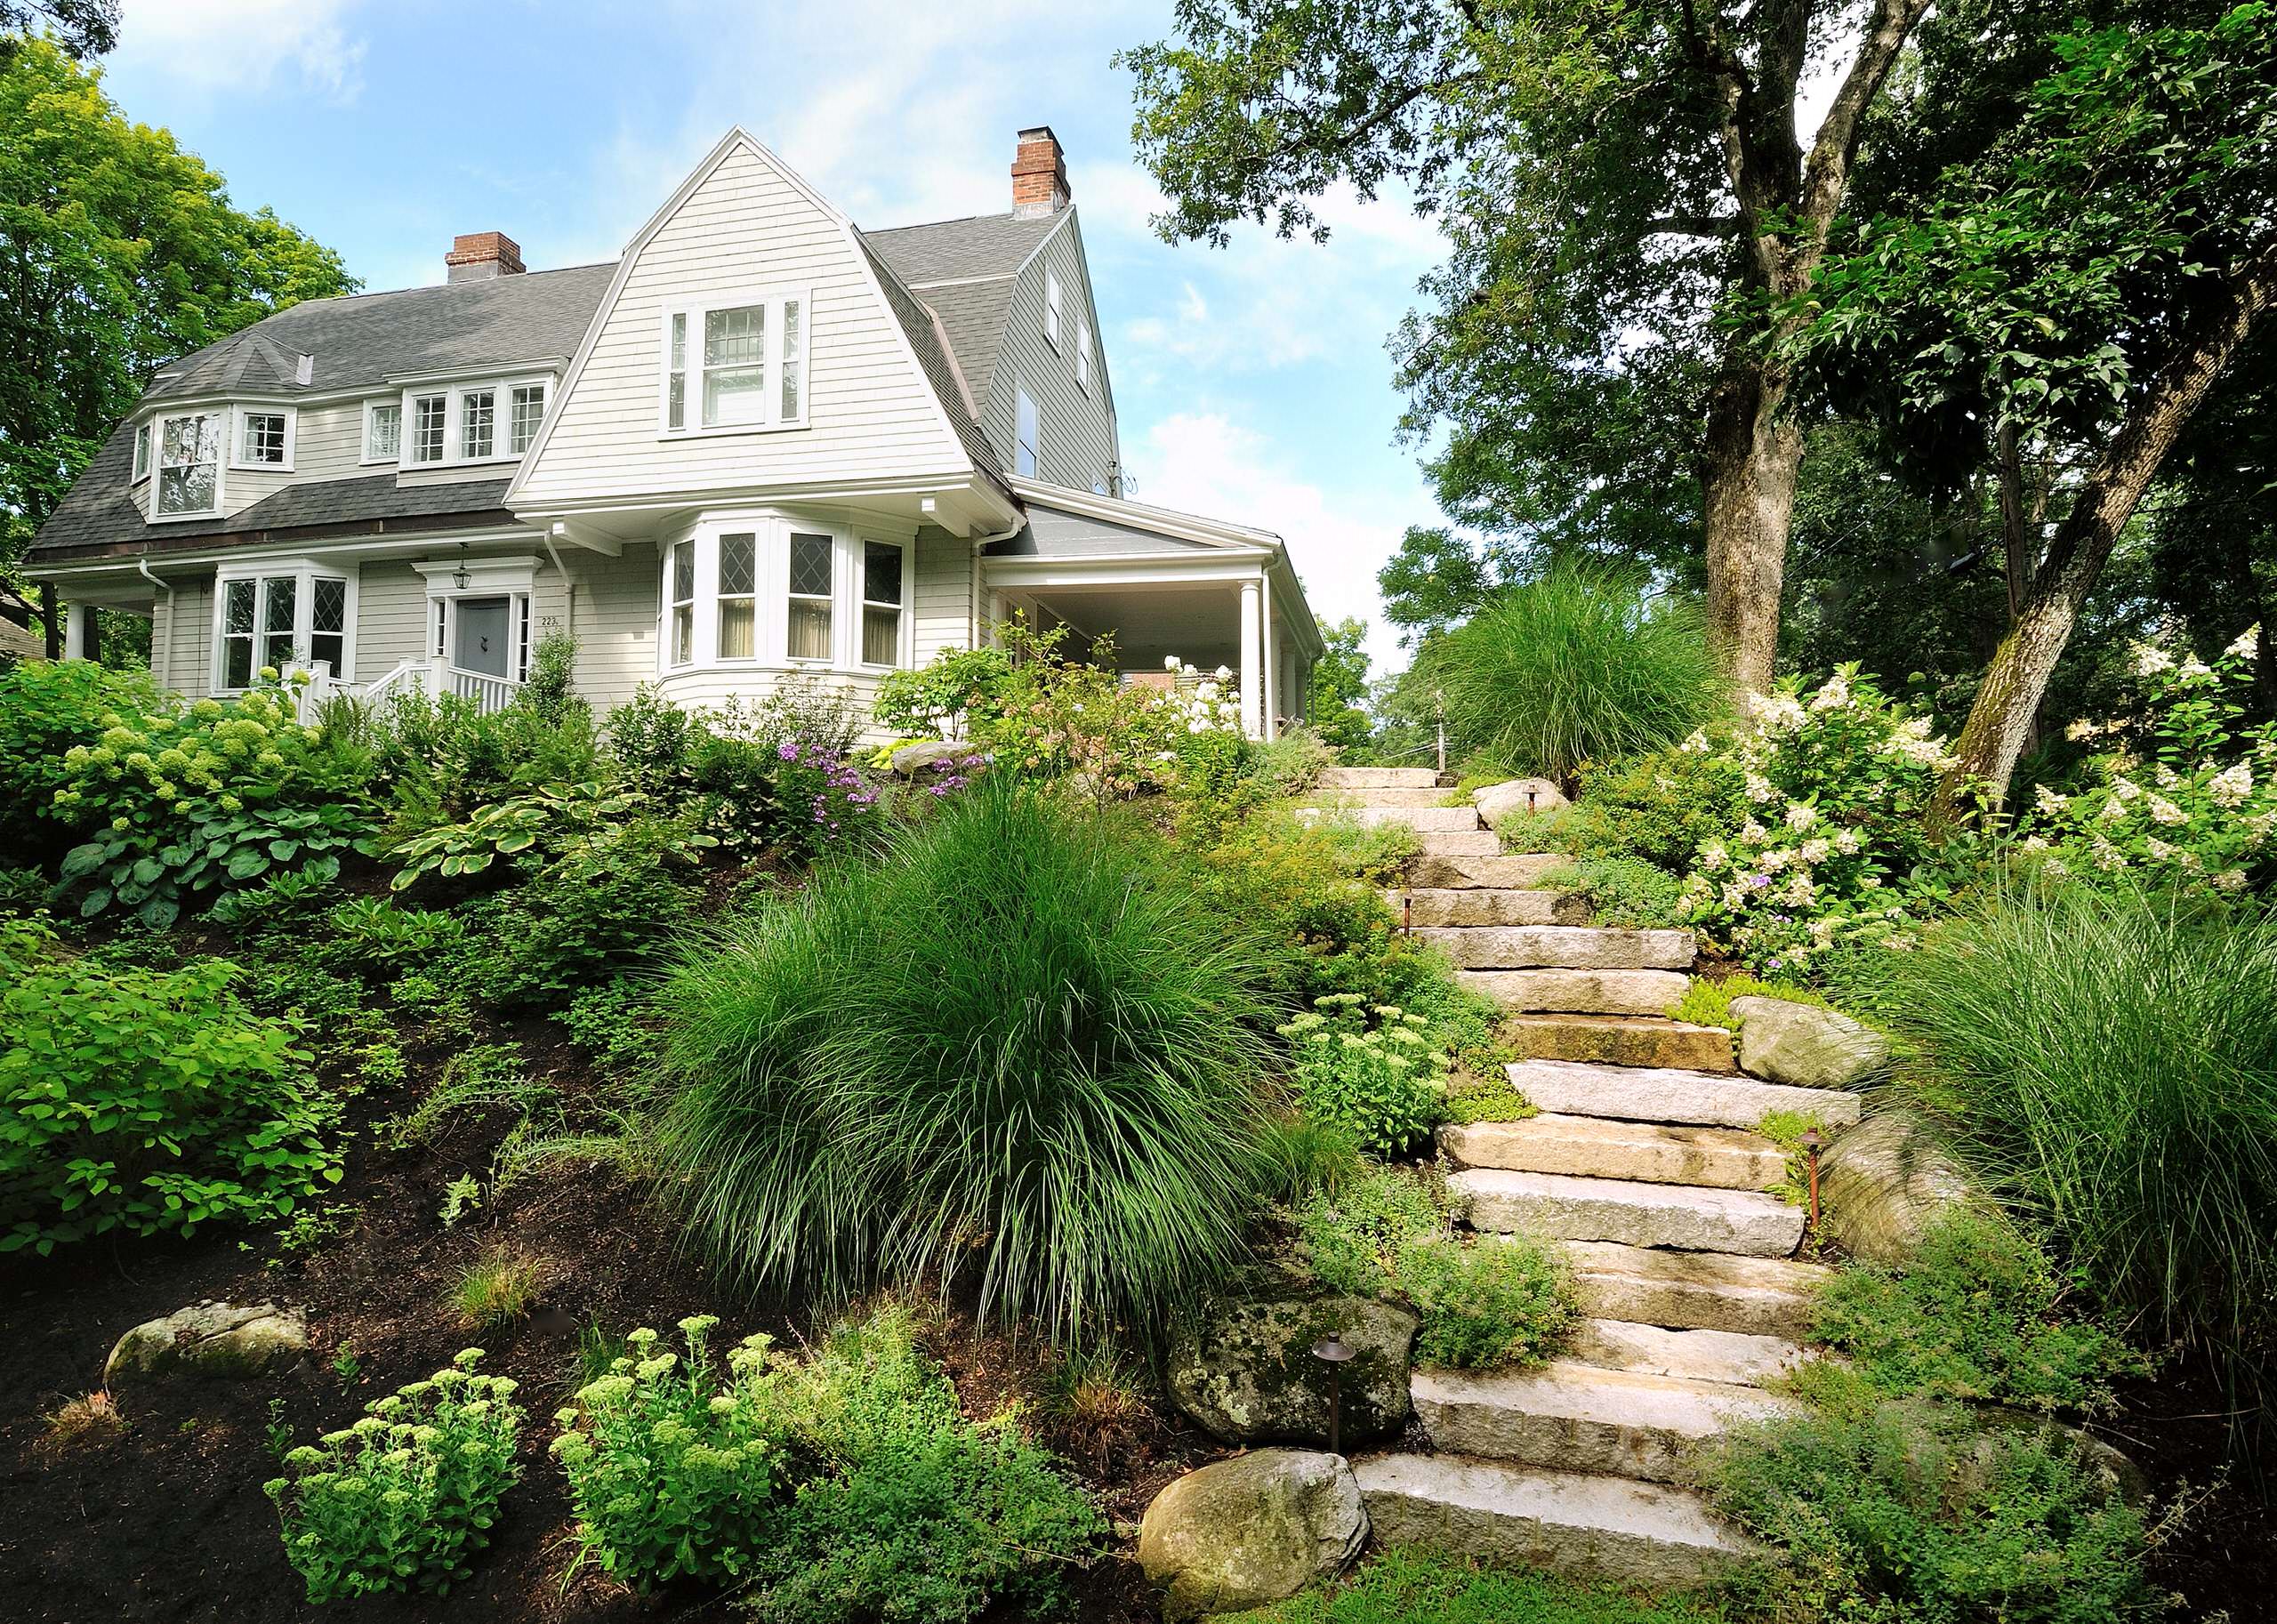 Steep Slope Landscaping Houzz, How To Landscape A Very Steep Slope